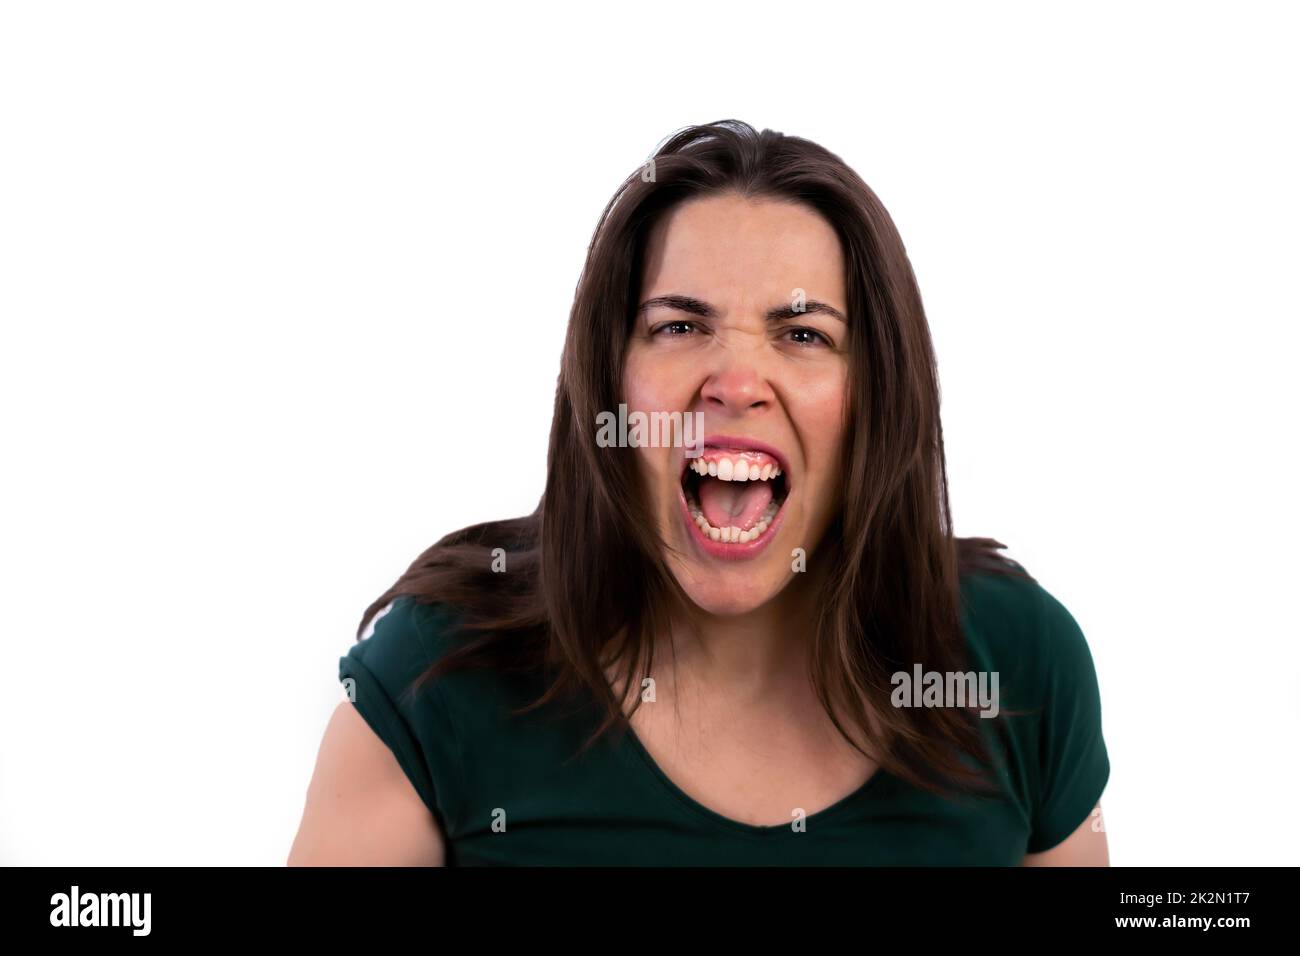 close-up of young girl screaming on white background Stock Photo